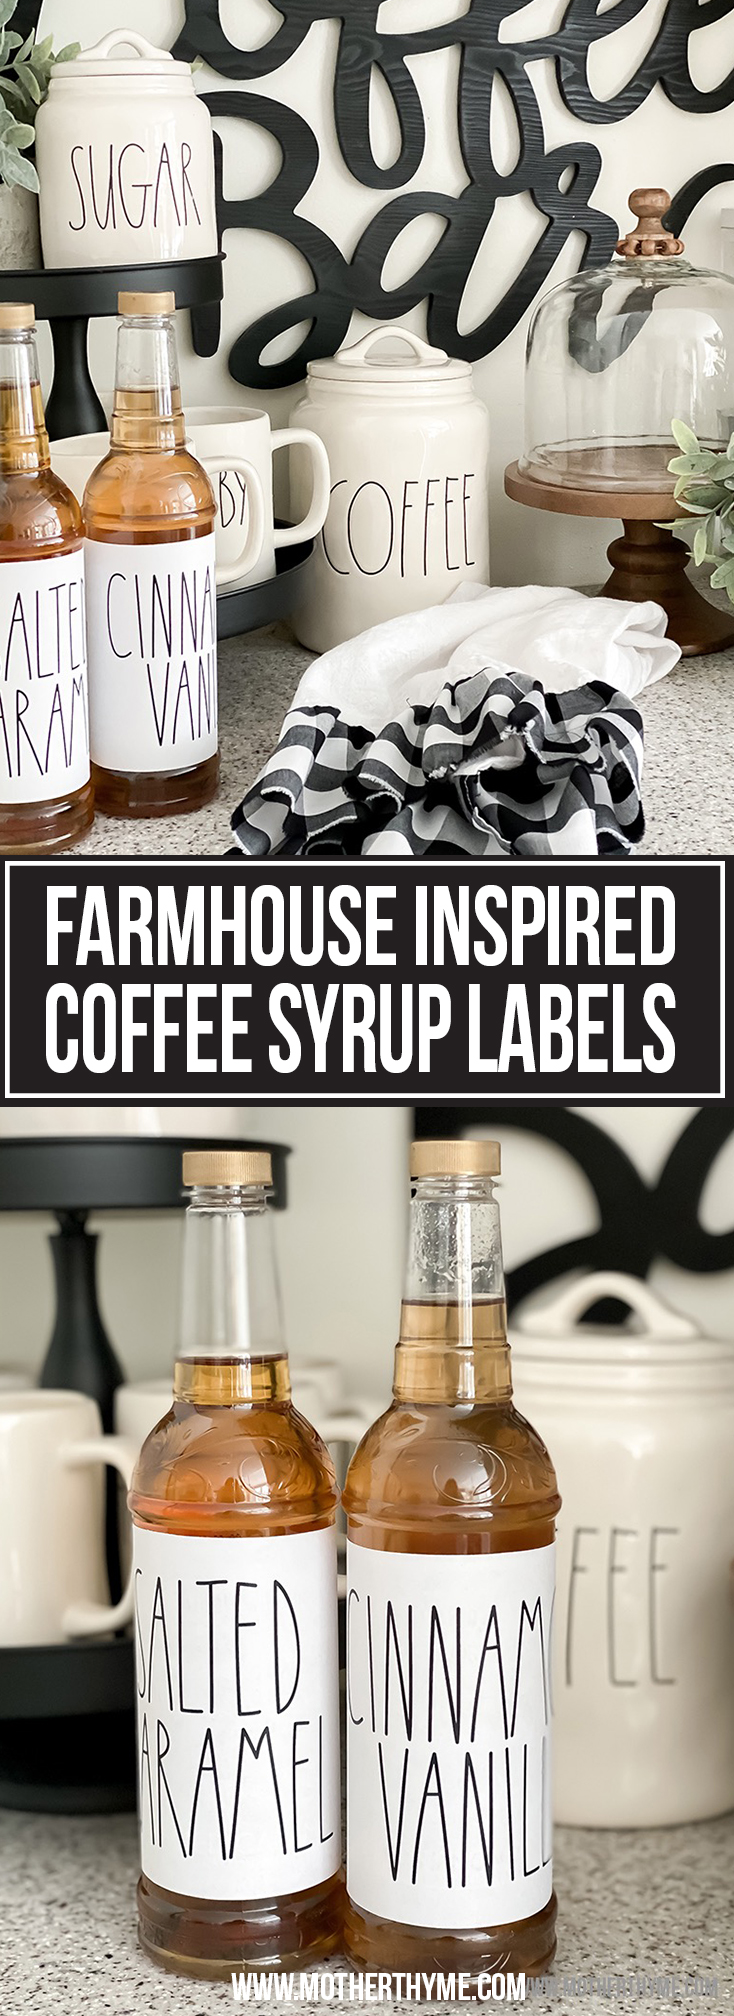 FARMHOUSE INSPIRED COFFEE SYRUP LABELS -FREE PRINTABLES